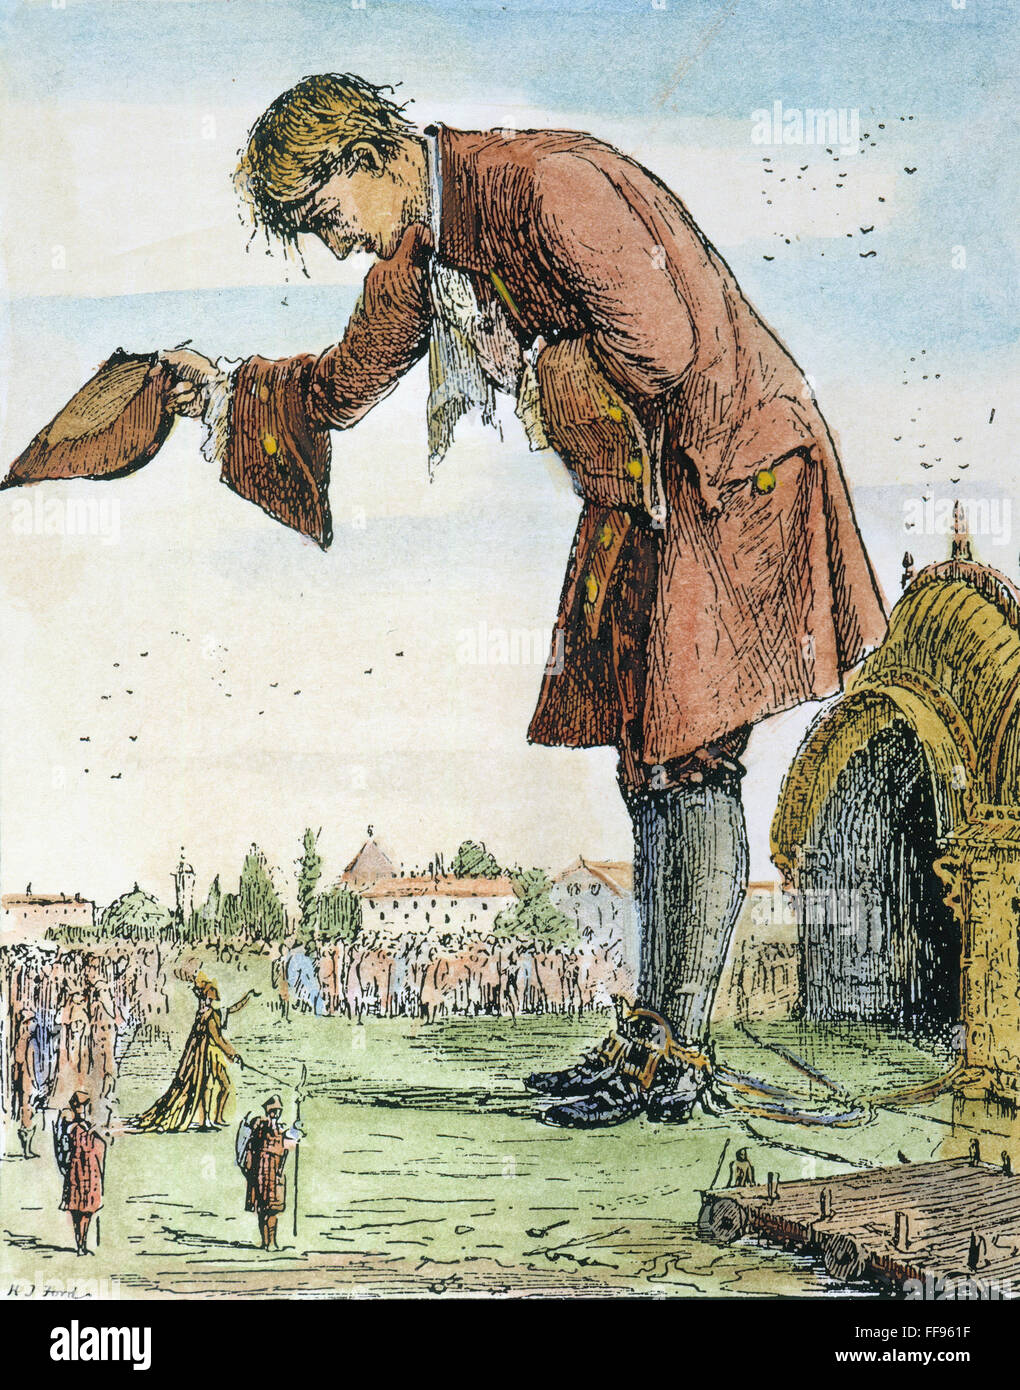 GULLIVER'S TRAVELS. /nGulliver in Lilliput. Illustration, 1891, by H.J. Ford for an edition of Jonathan Swift's 'Gulliver's Travels.' Stock Photo